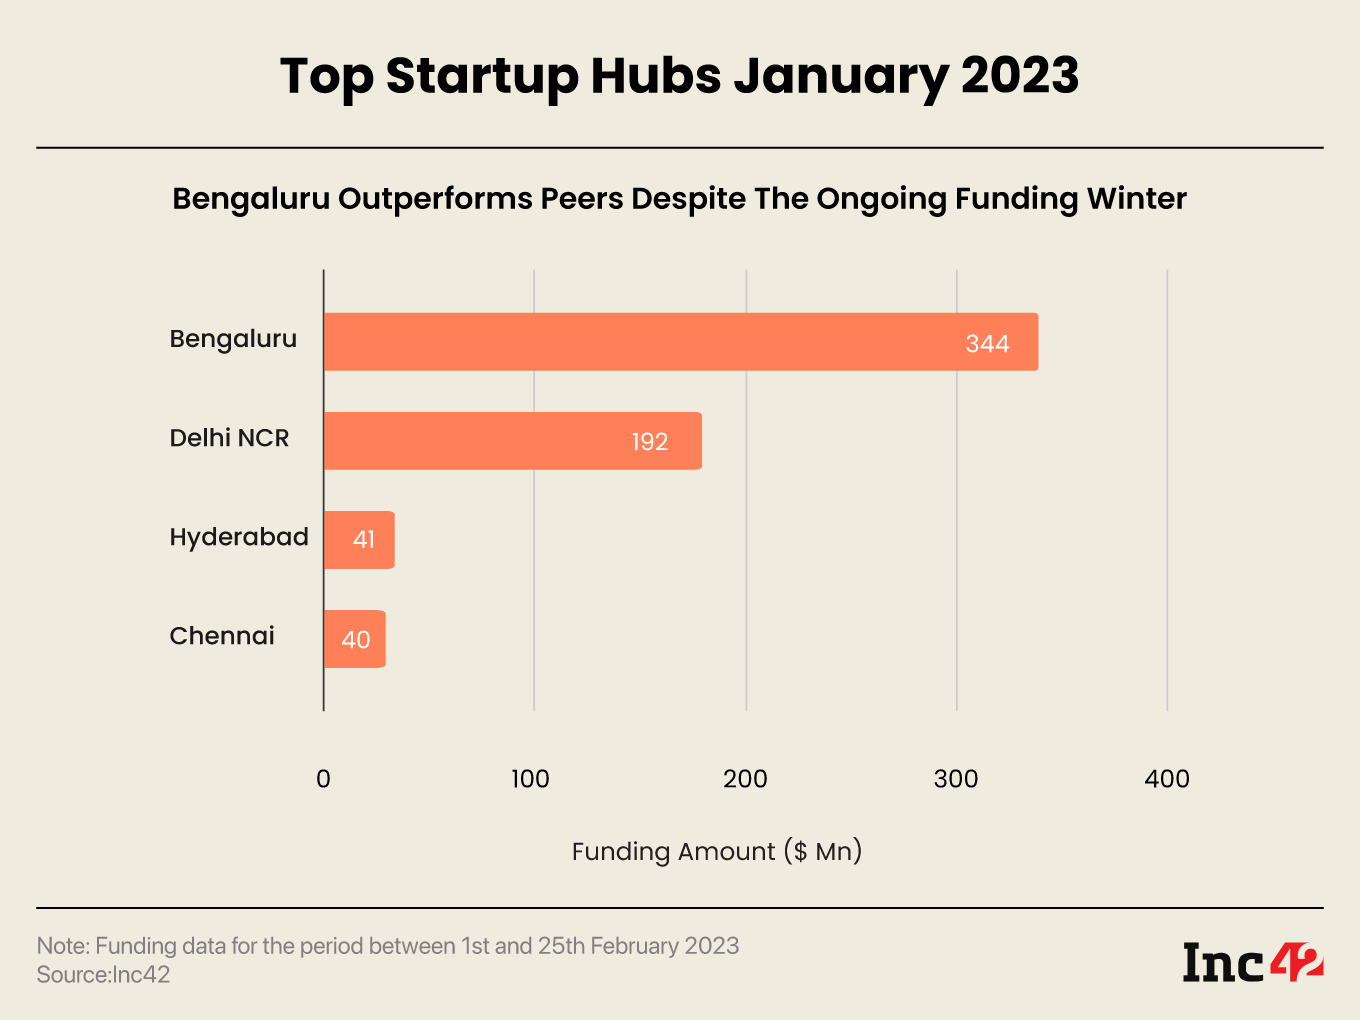 Top startup hubs in February 2023